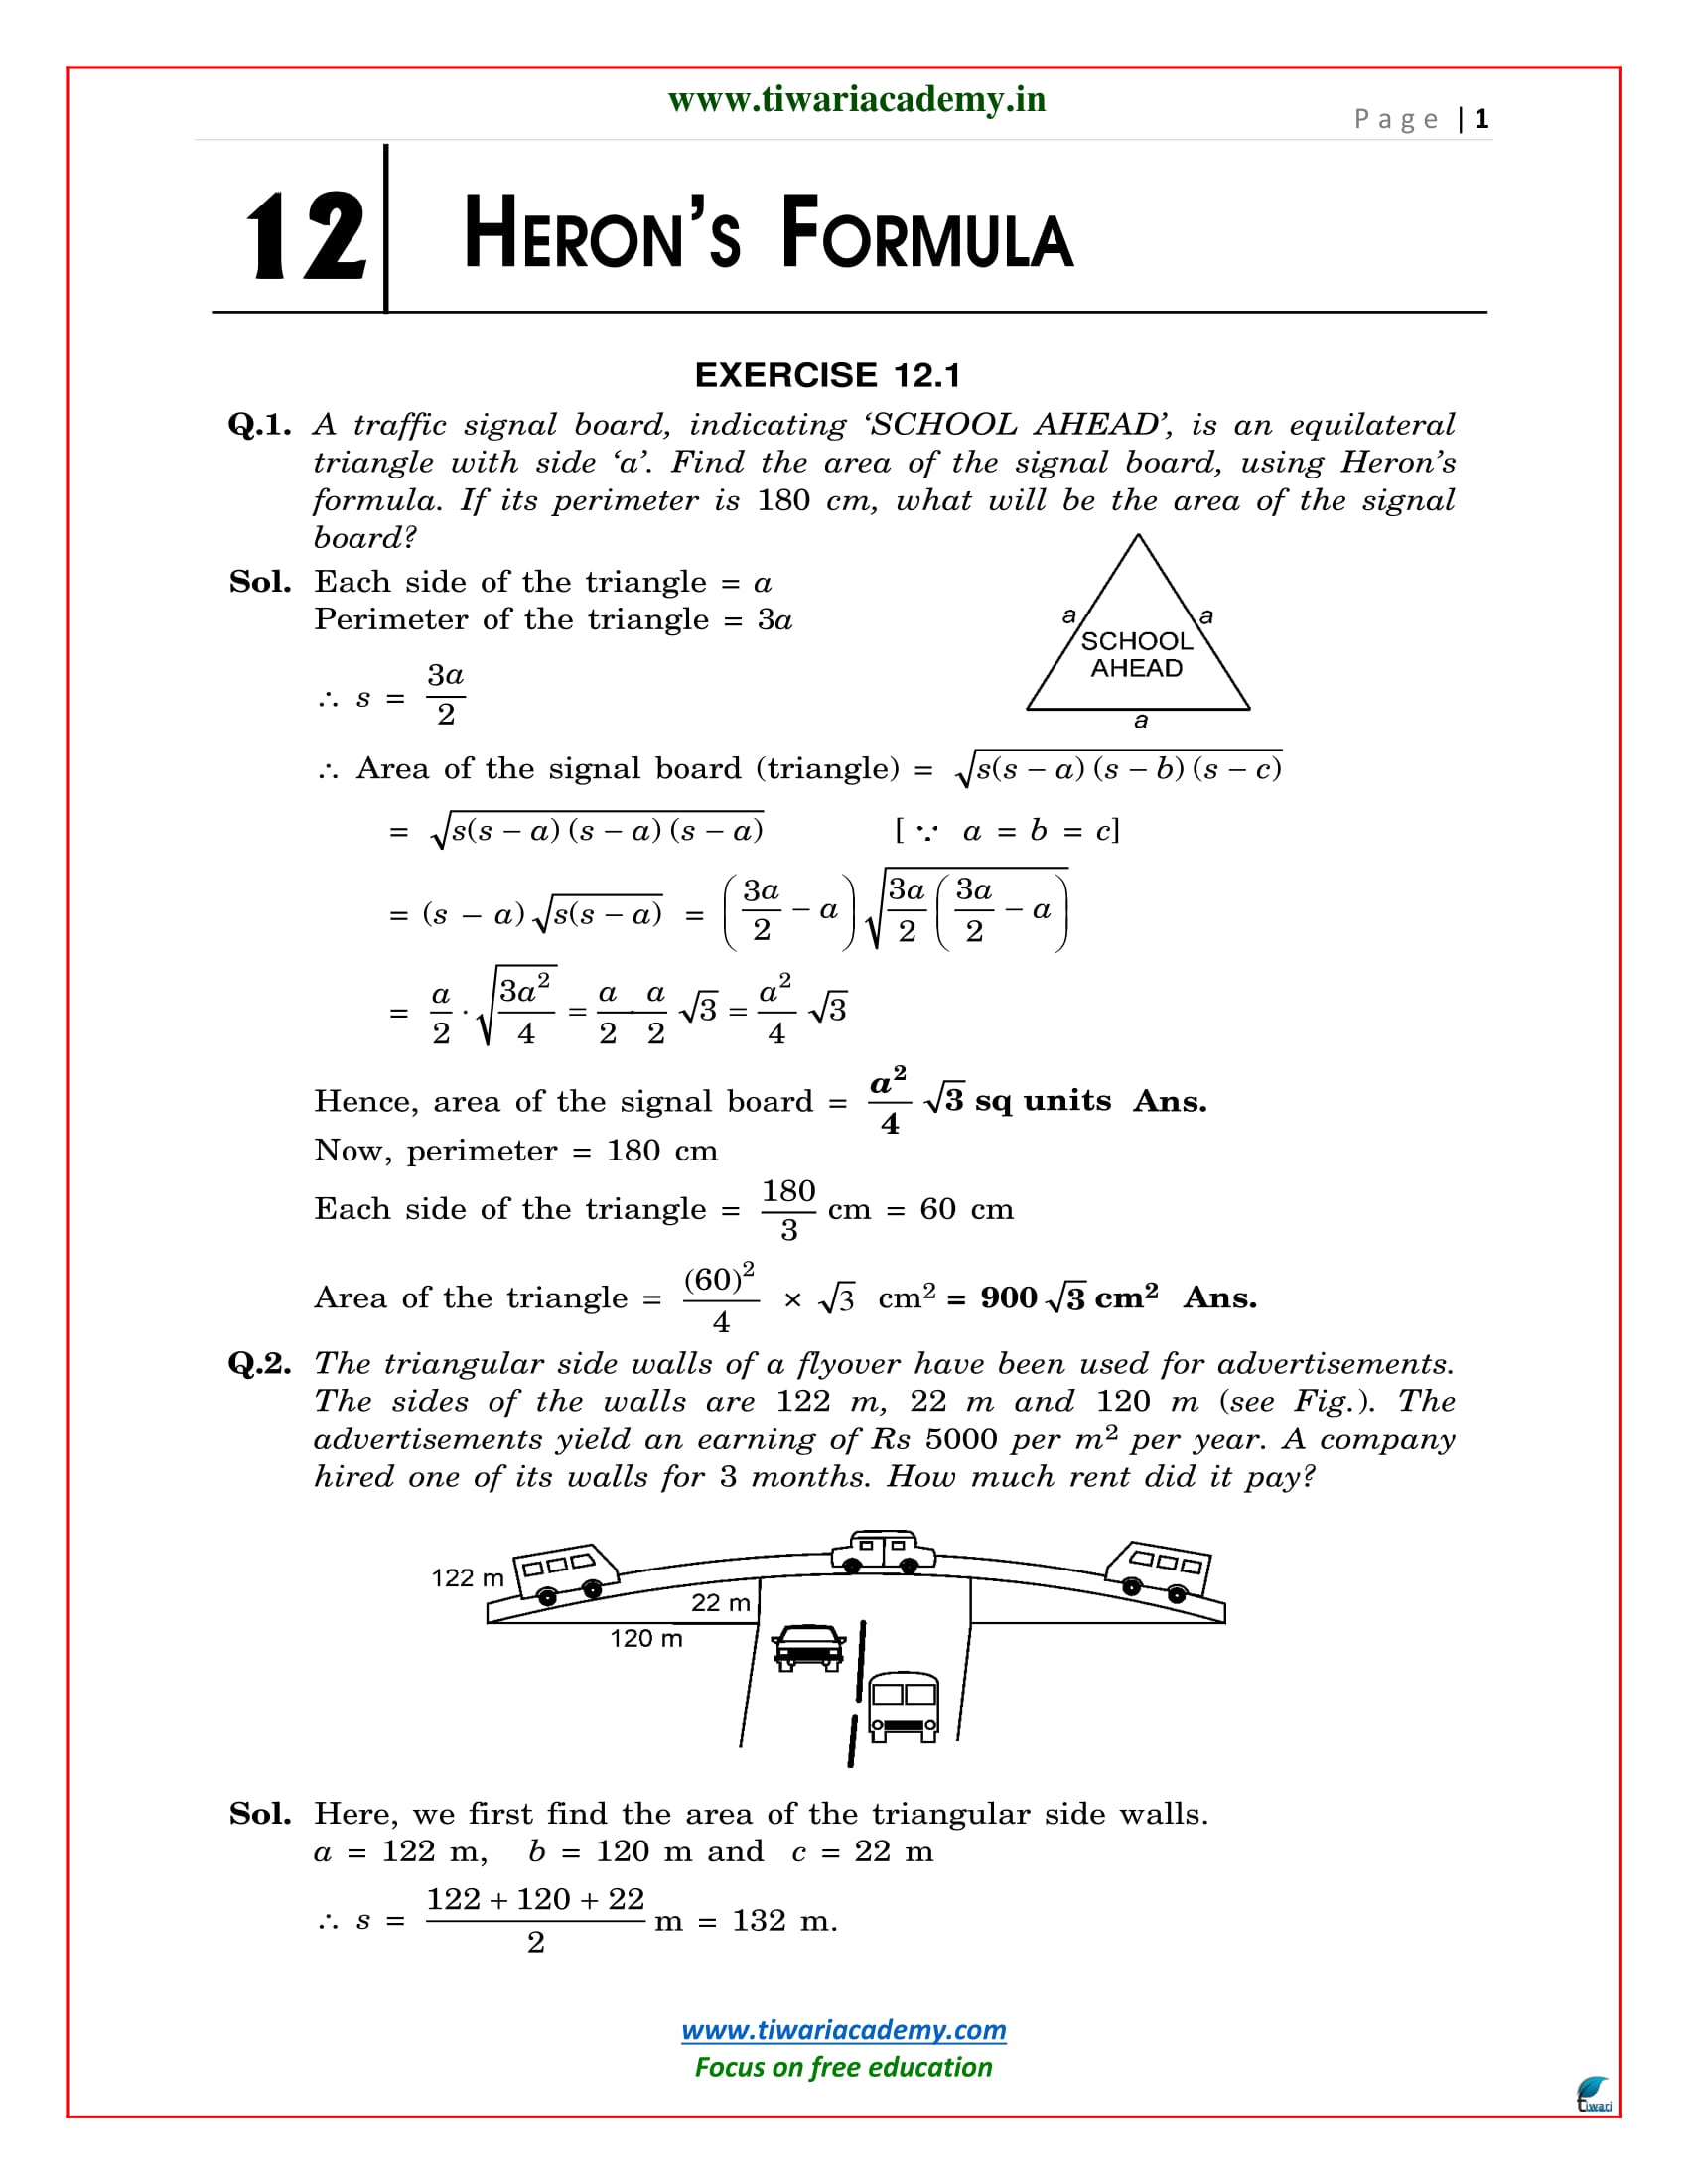 NCERT Solutions for Class 9 Maths Chapter 12 Exercise 12.1